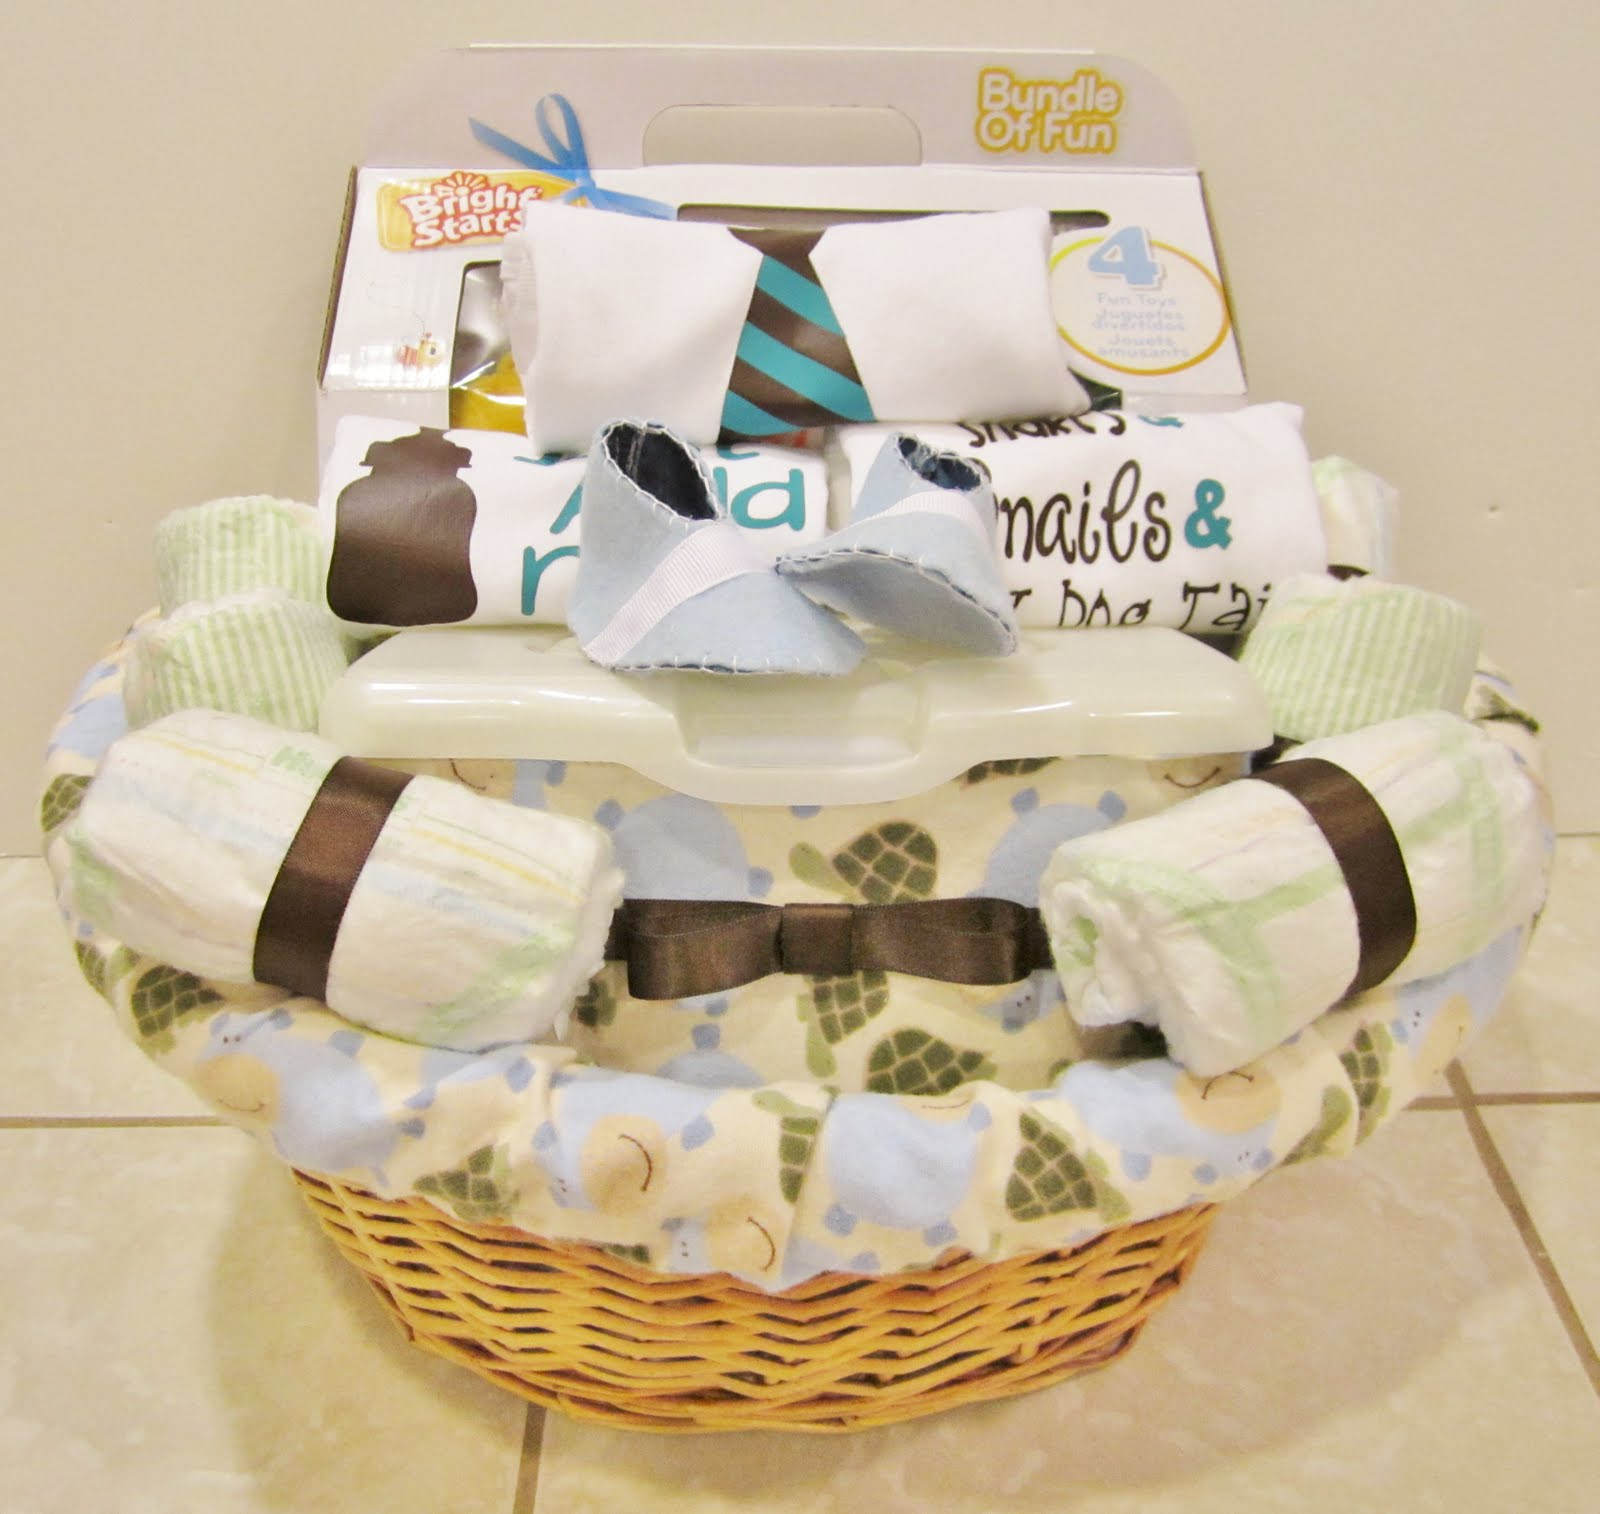 Babyshower Gift Ideas
 Life in the Motherhood Baby Shower Gift Basket For a